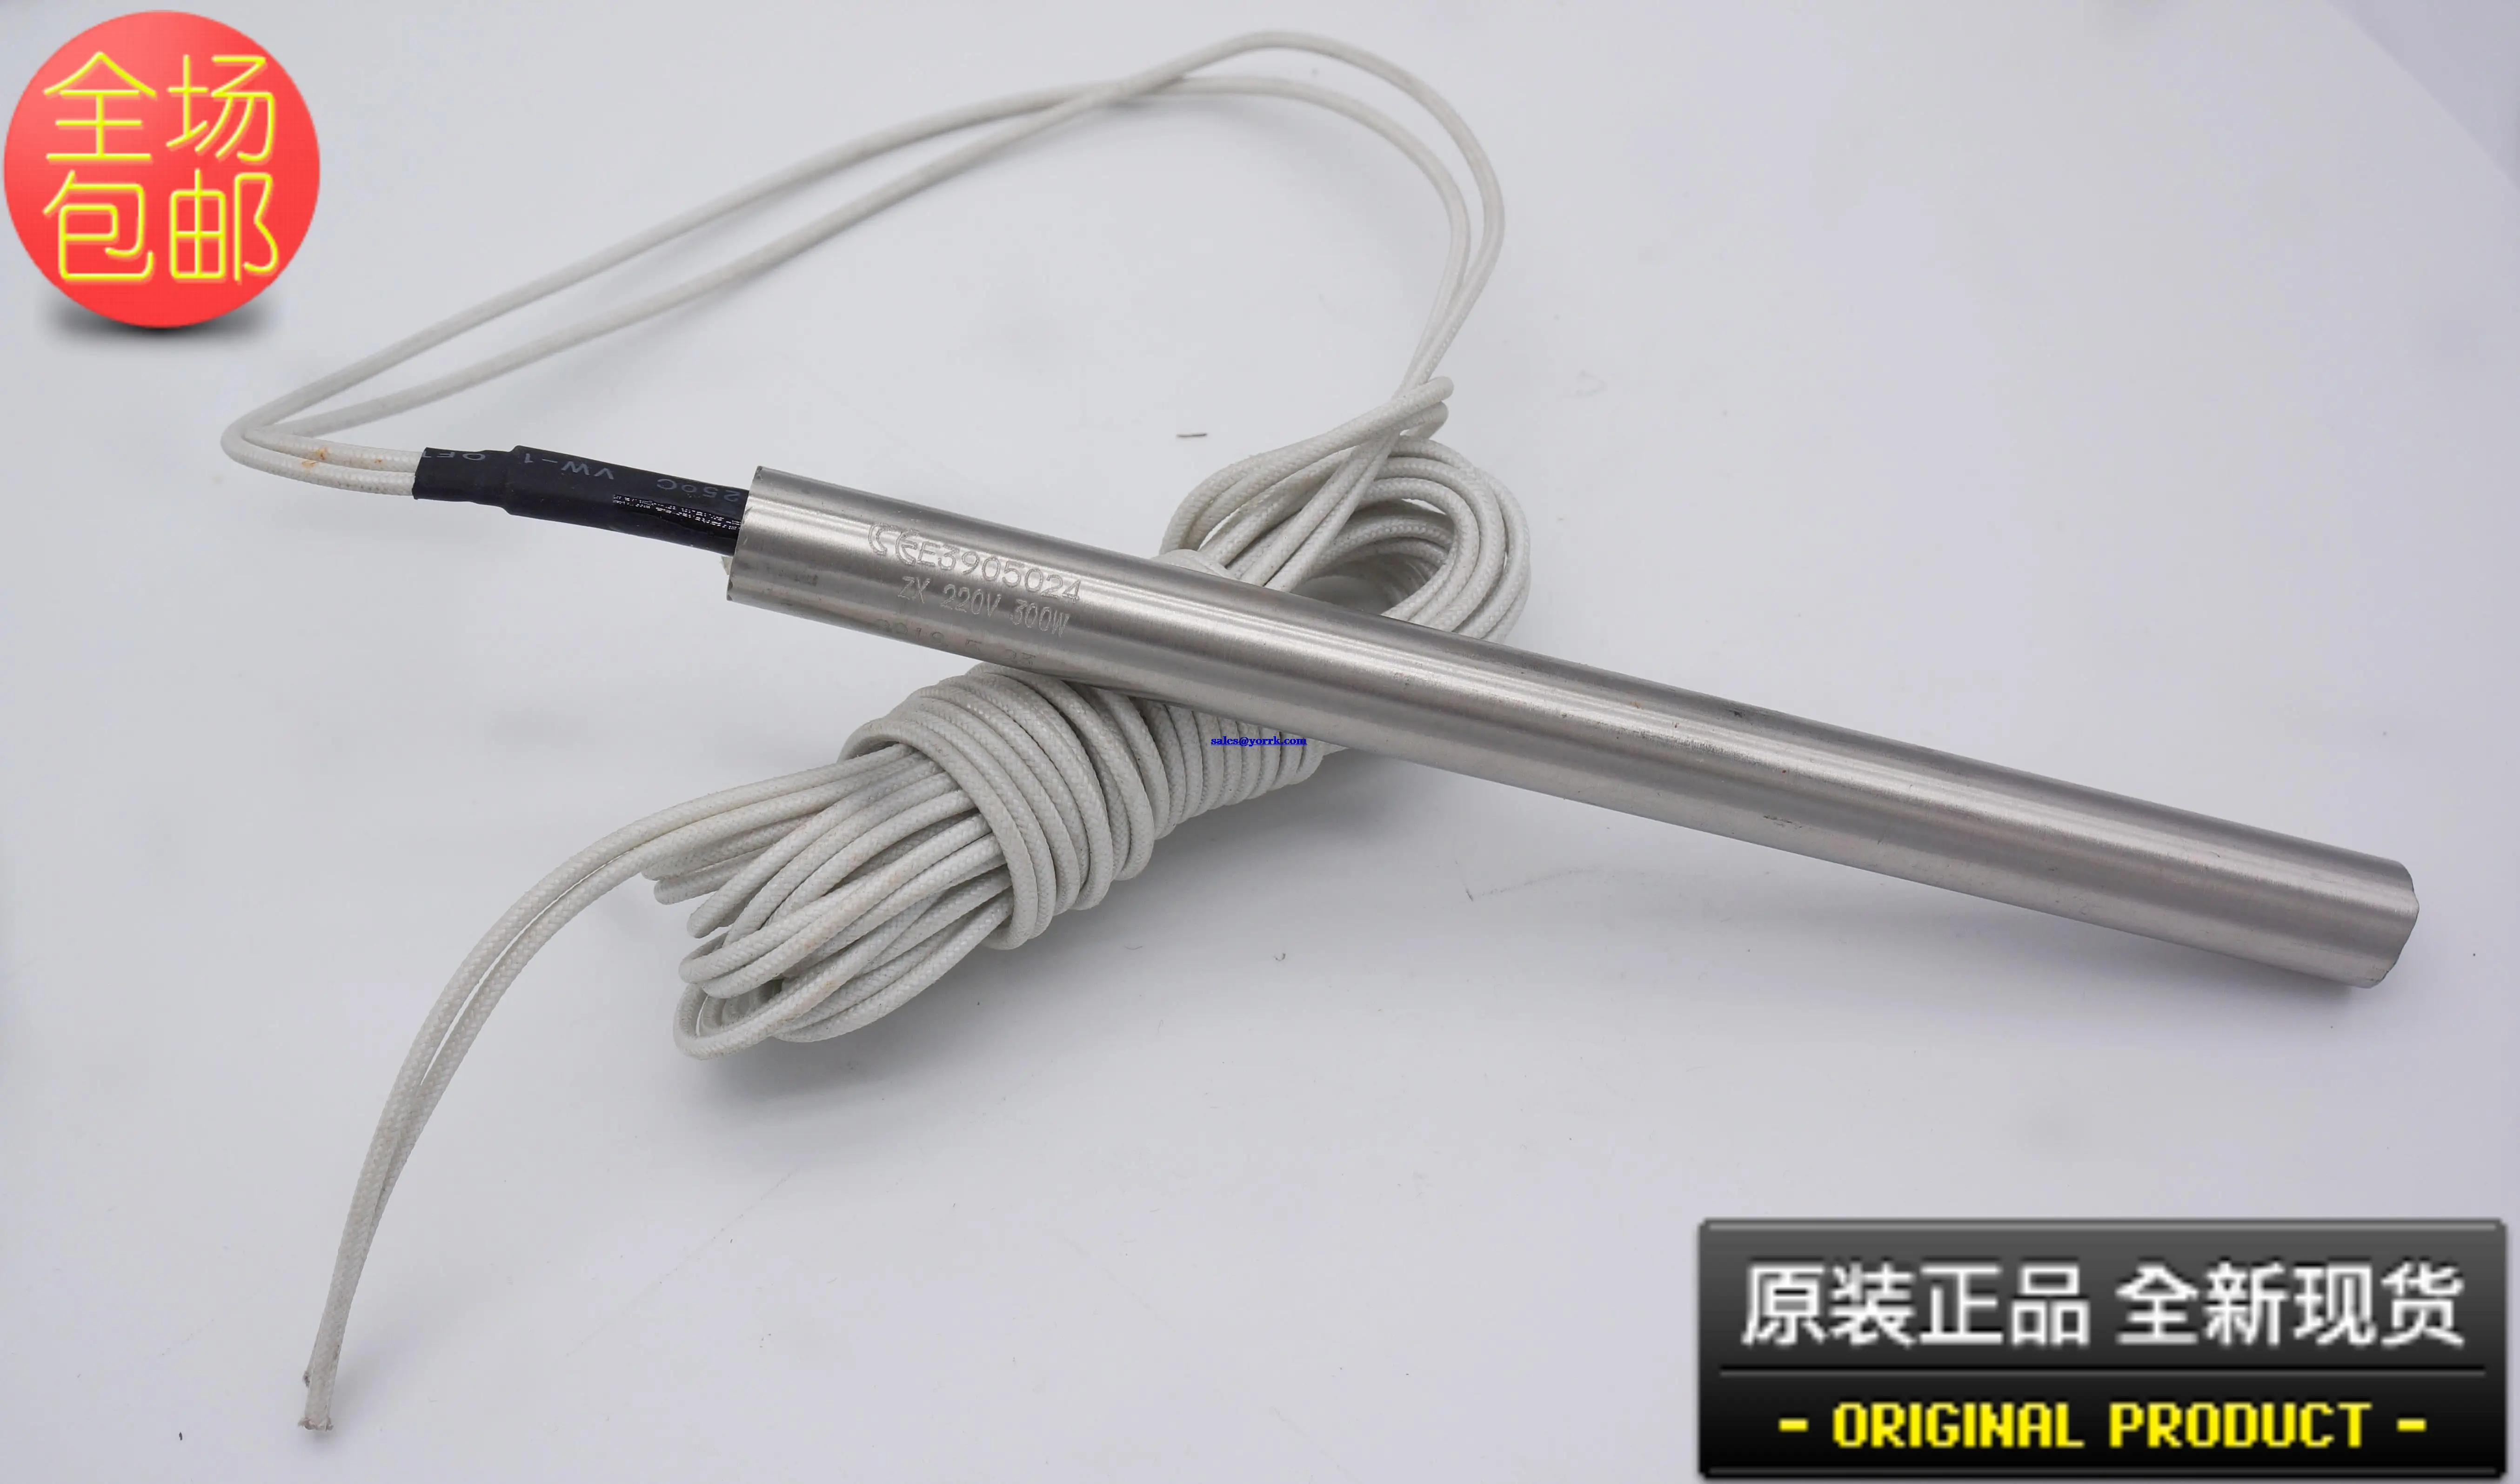 

E3905024 oil heating rod power 300 w's original central air conditioning heating controller